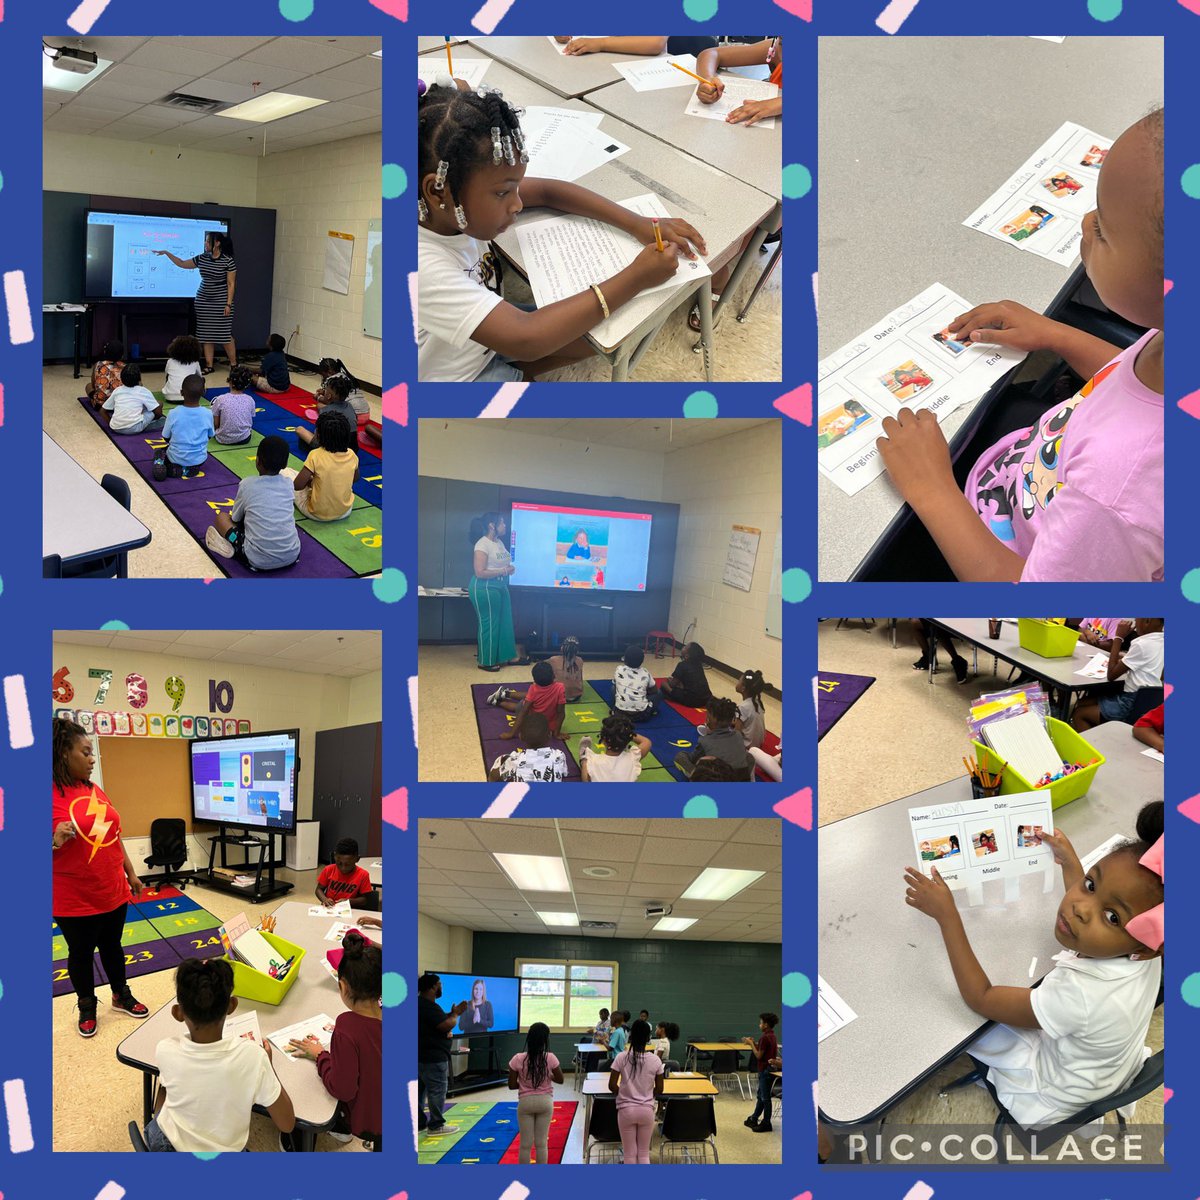 Summer Reading/Math Camp is underway @EmpowerSchoolAL! Read Alouds, Story Retelling and Sequencing, Heggerty Phonemic
Awareness instruction and decodable texts!! So much student learning going on! I ♥️ it!!!!   #NoSummerSlide #EveryChild.EveryChance.EveryDay